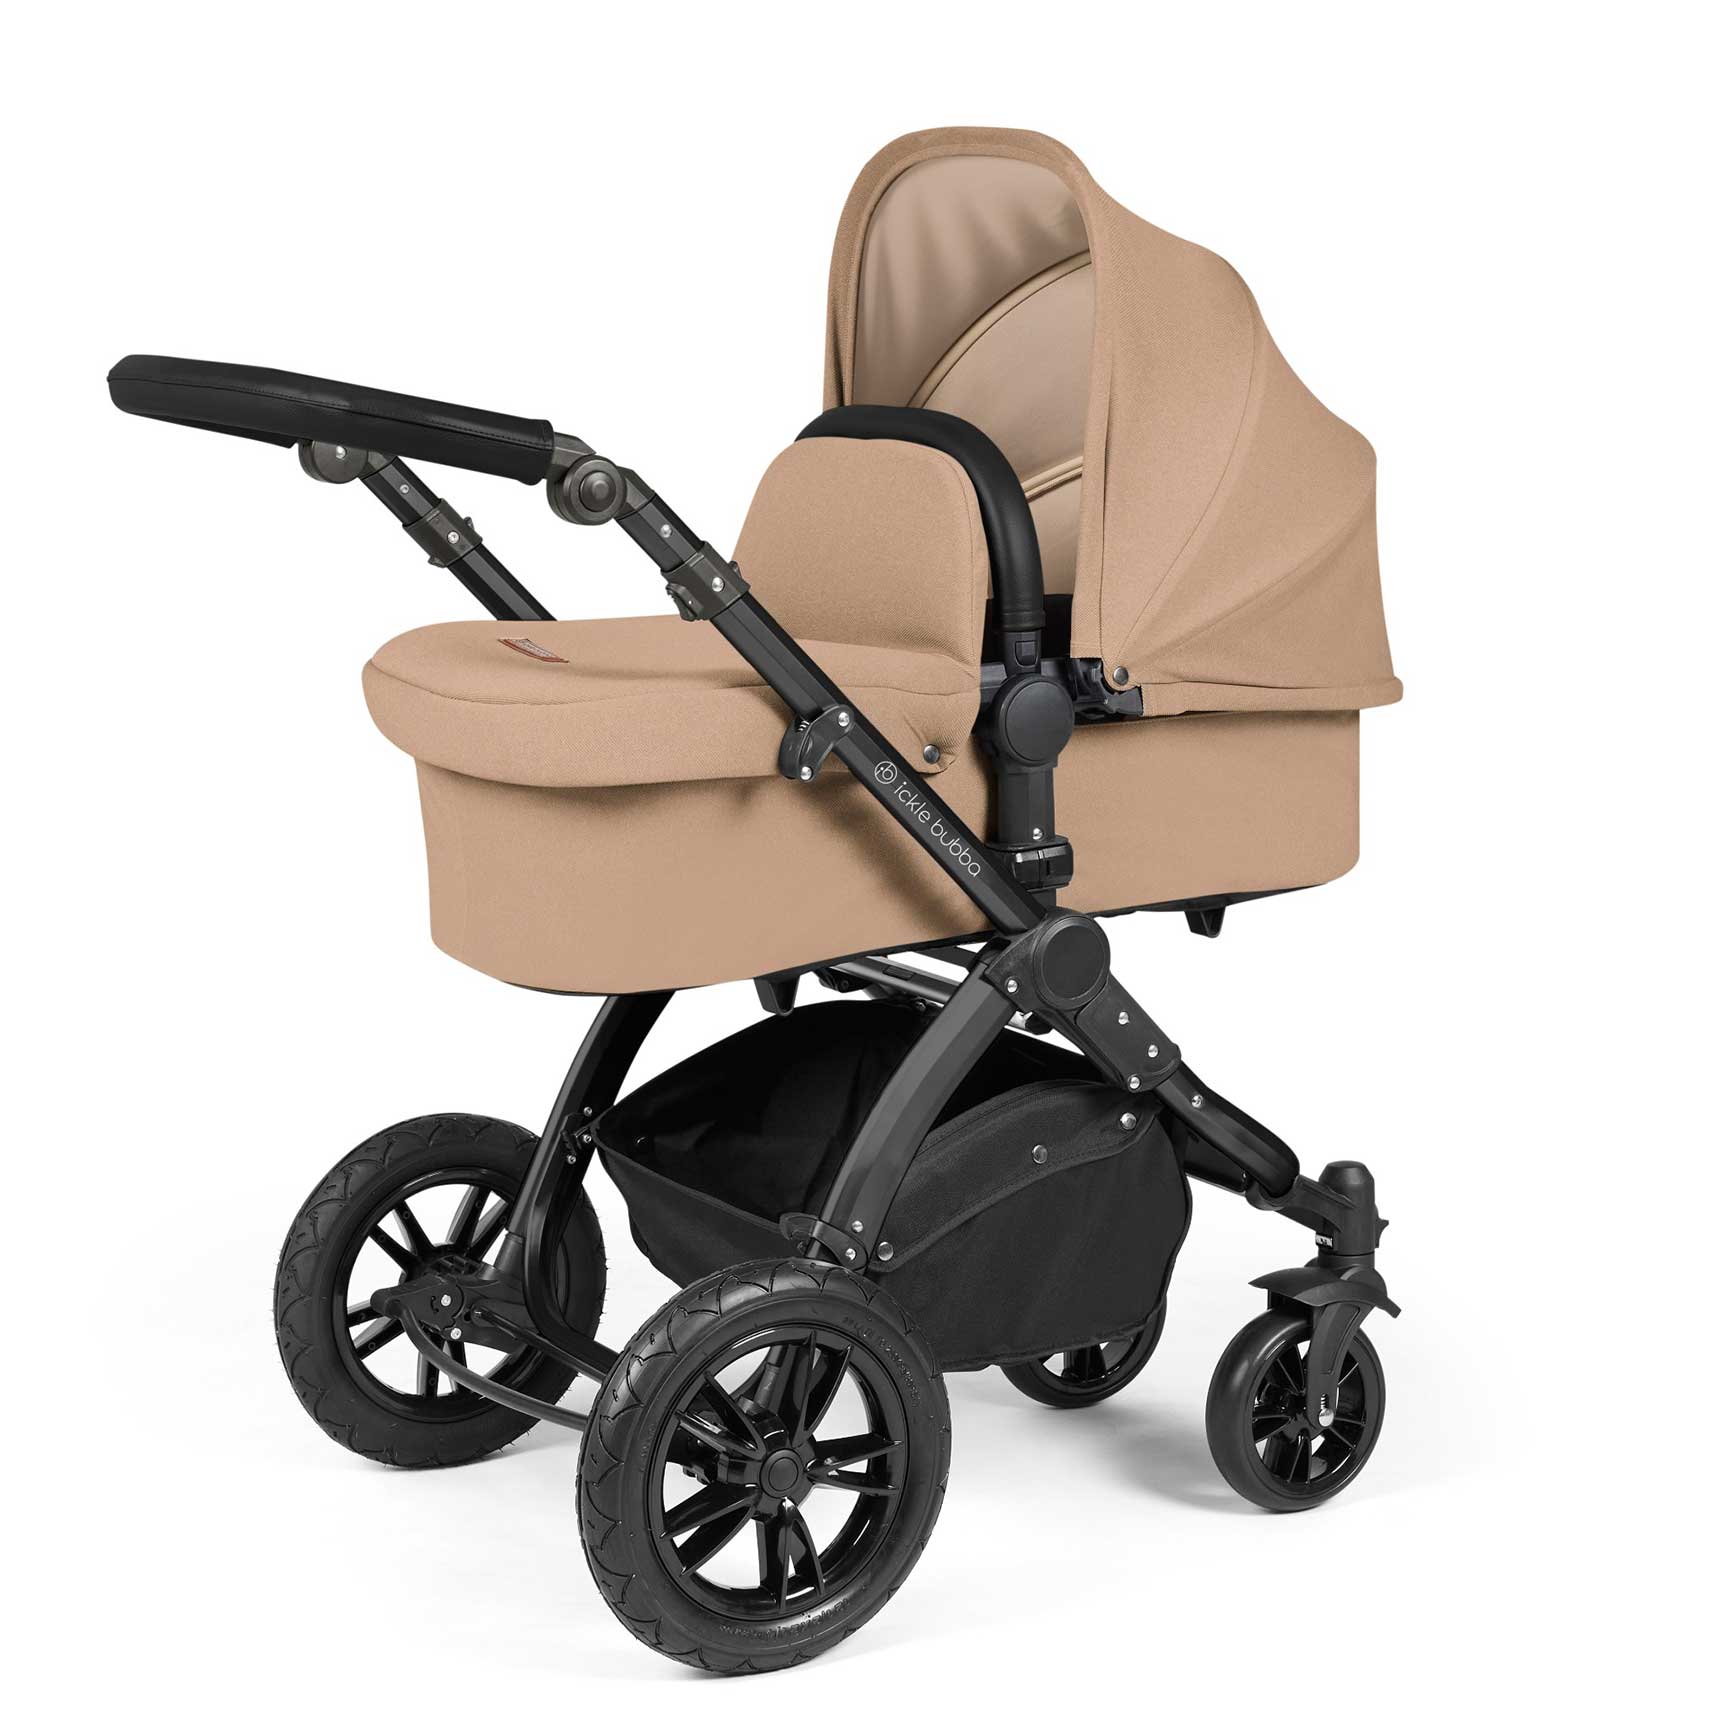 Ickle Bubba Stomp Luxe 2-in-1 Plus Pushchair & Carrycot in Black/Desert/Black Travel Systems 10-003-001-208 5056515026252